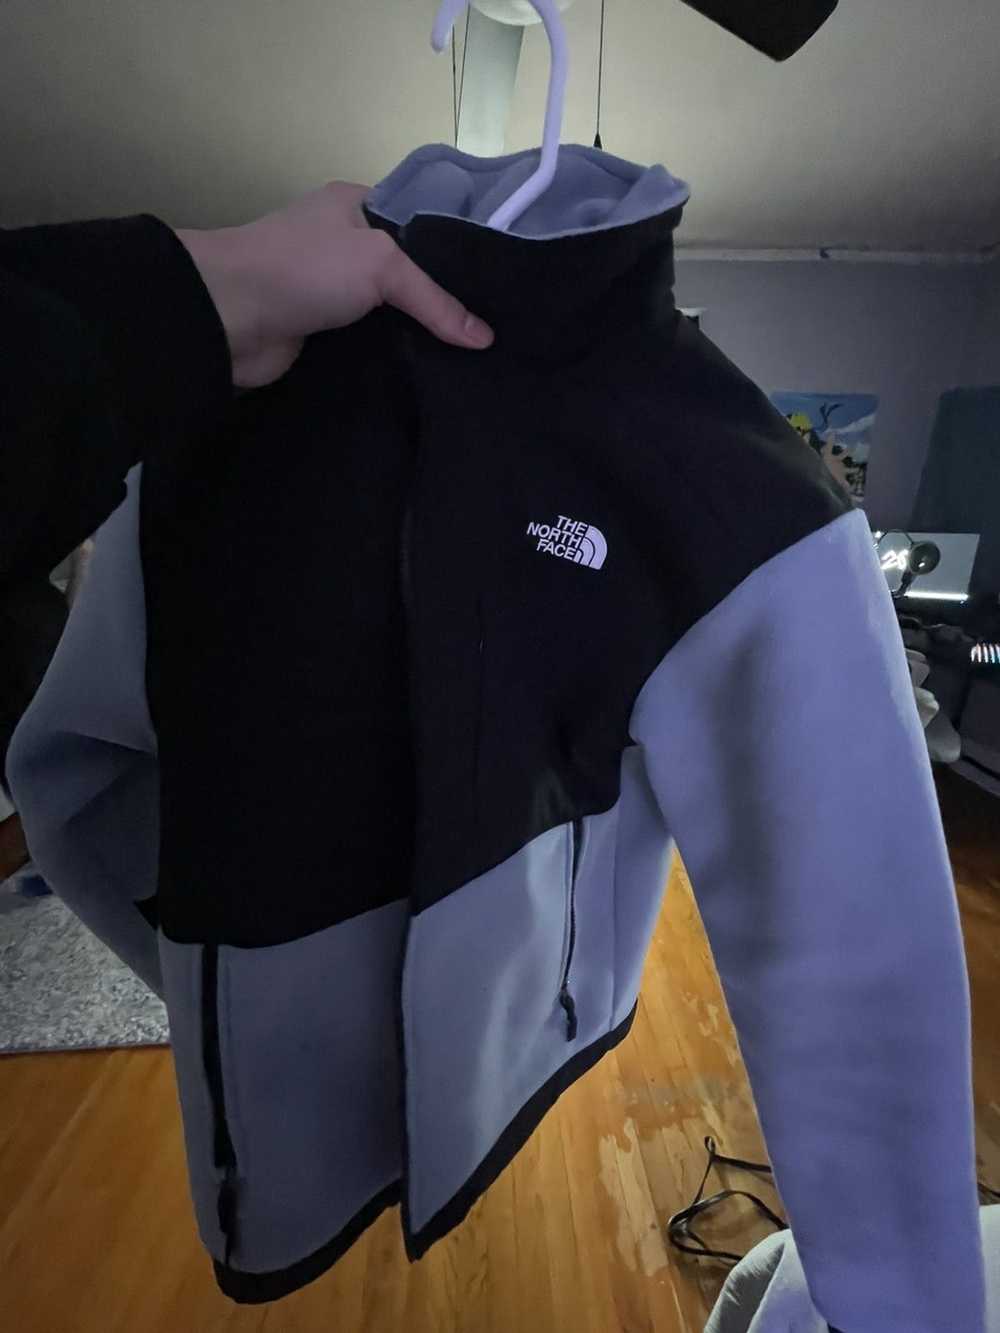 The North Face North Face Jacket - image 2